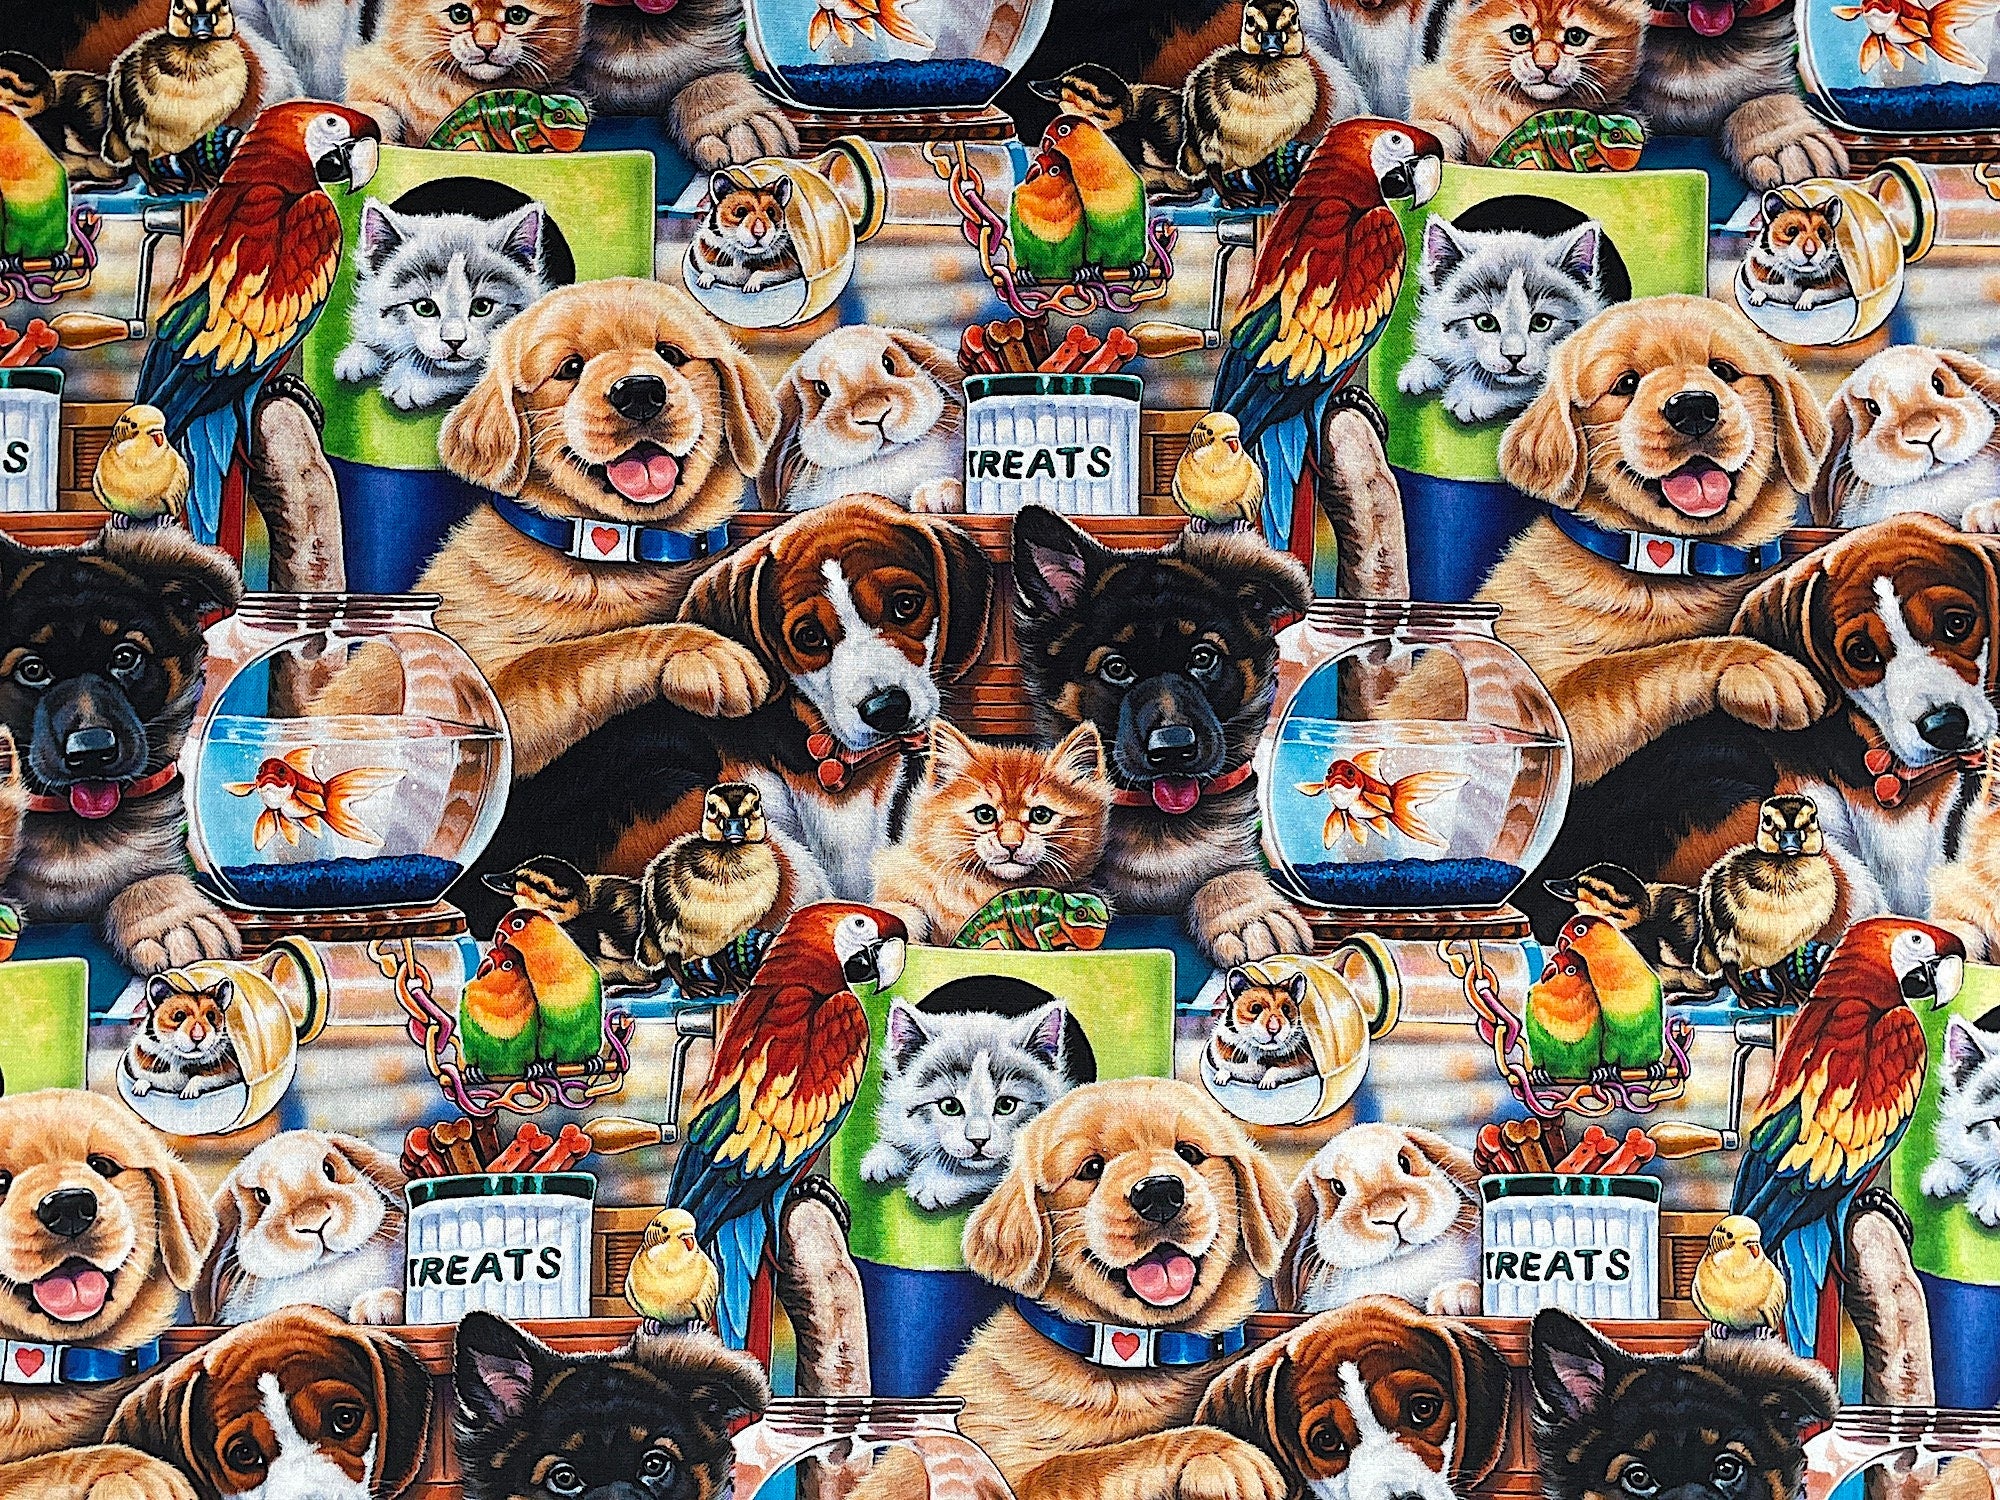 Here is an adorable fabric that is covered with small animals called "Pet Shop". There are dogs, cats, a parrots, a mouse, fish in fish bowls, a duck and love birds.